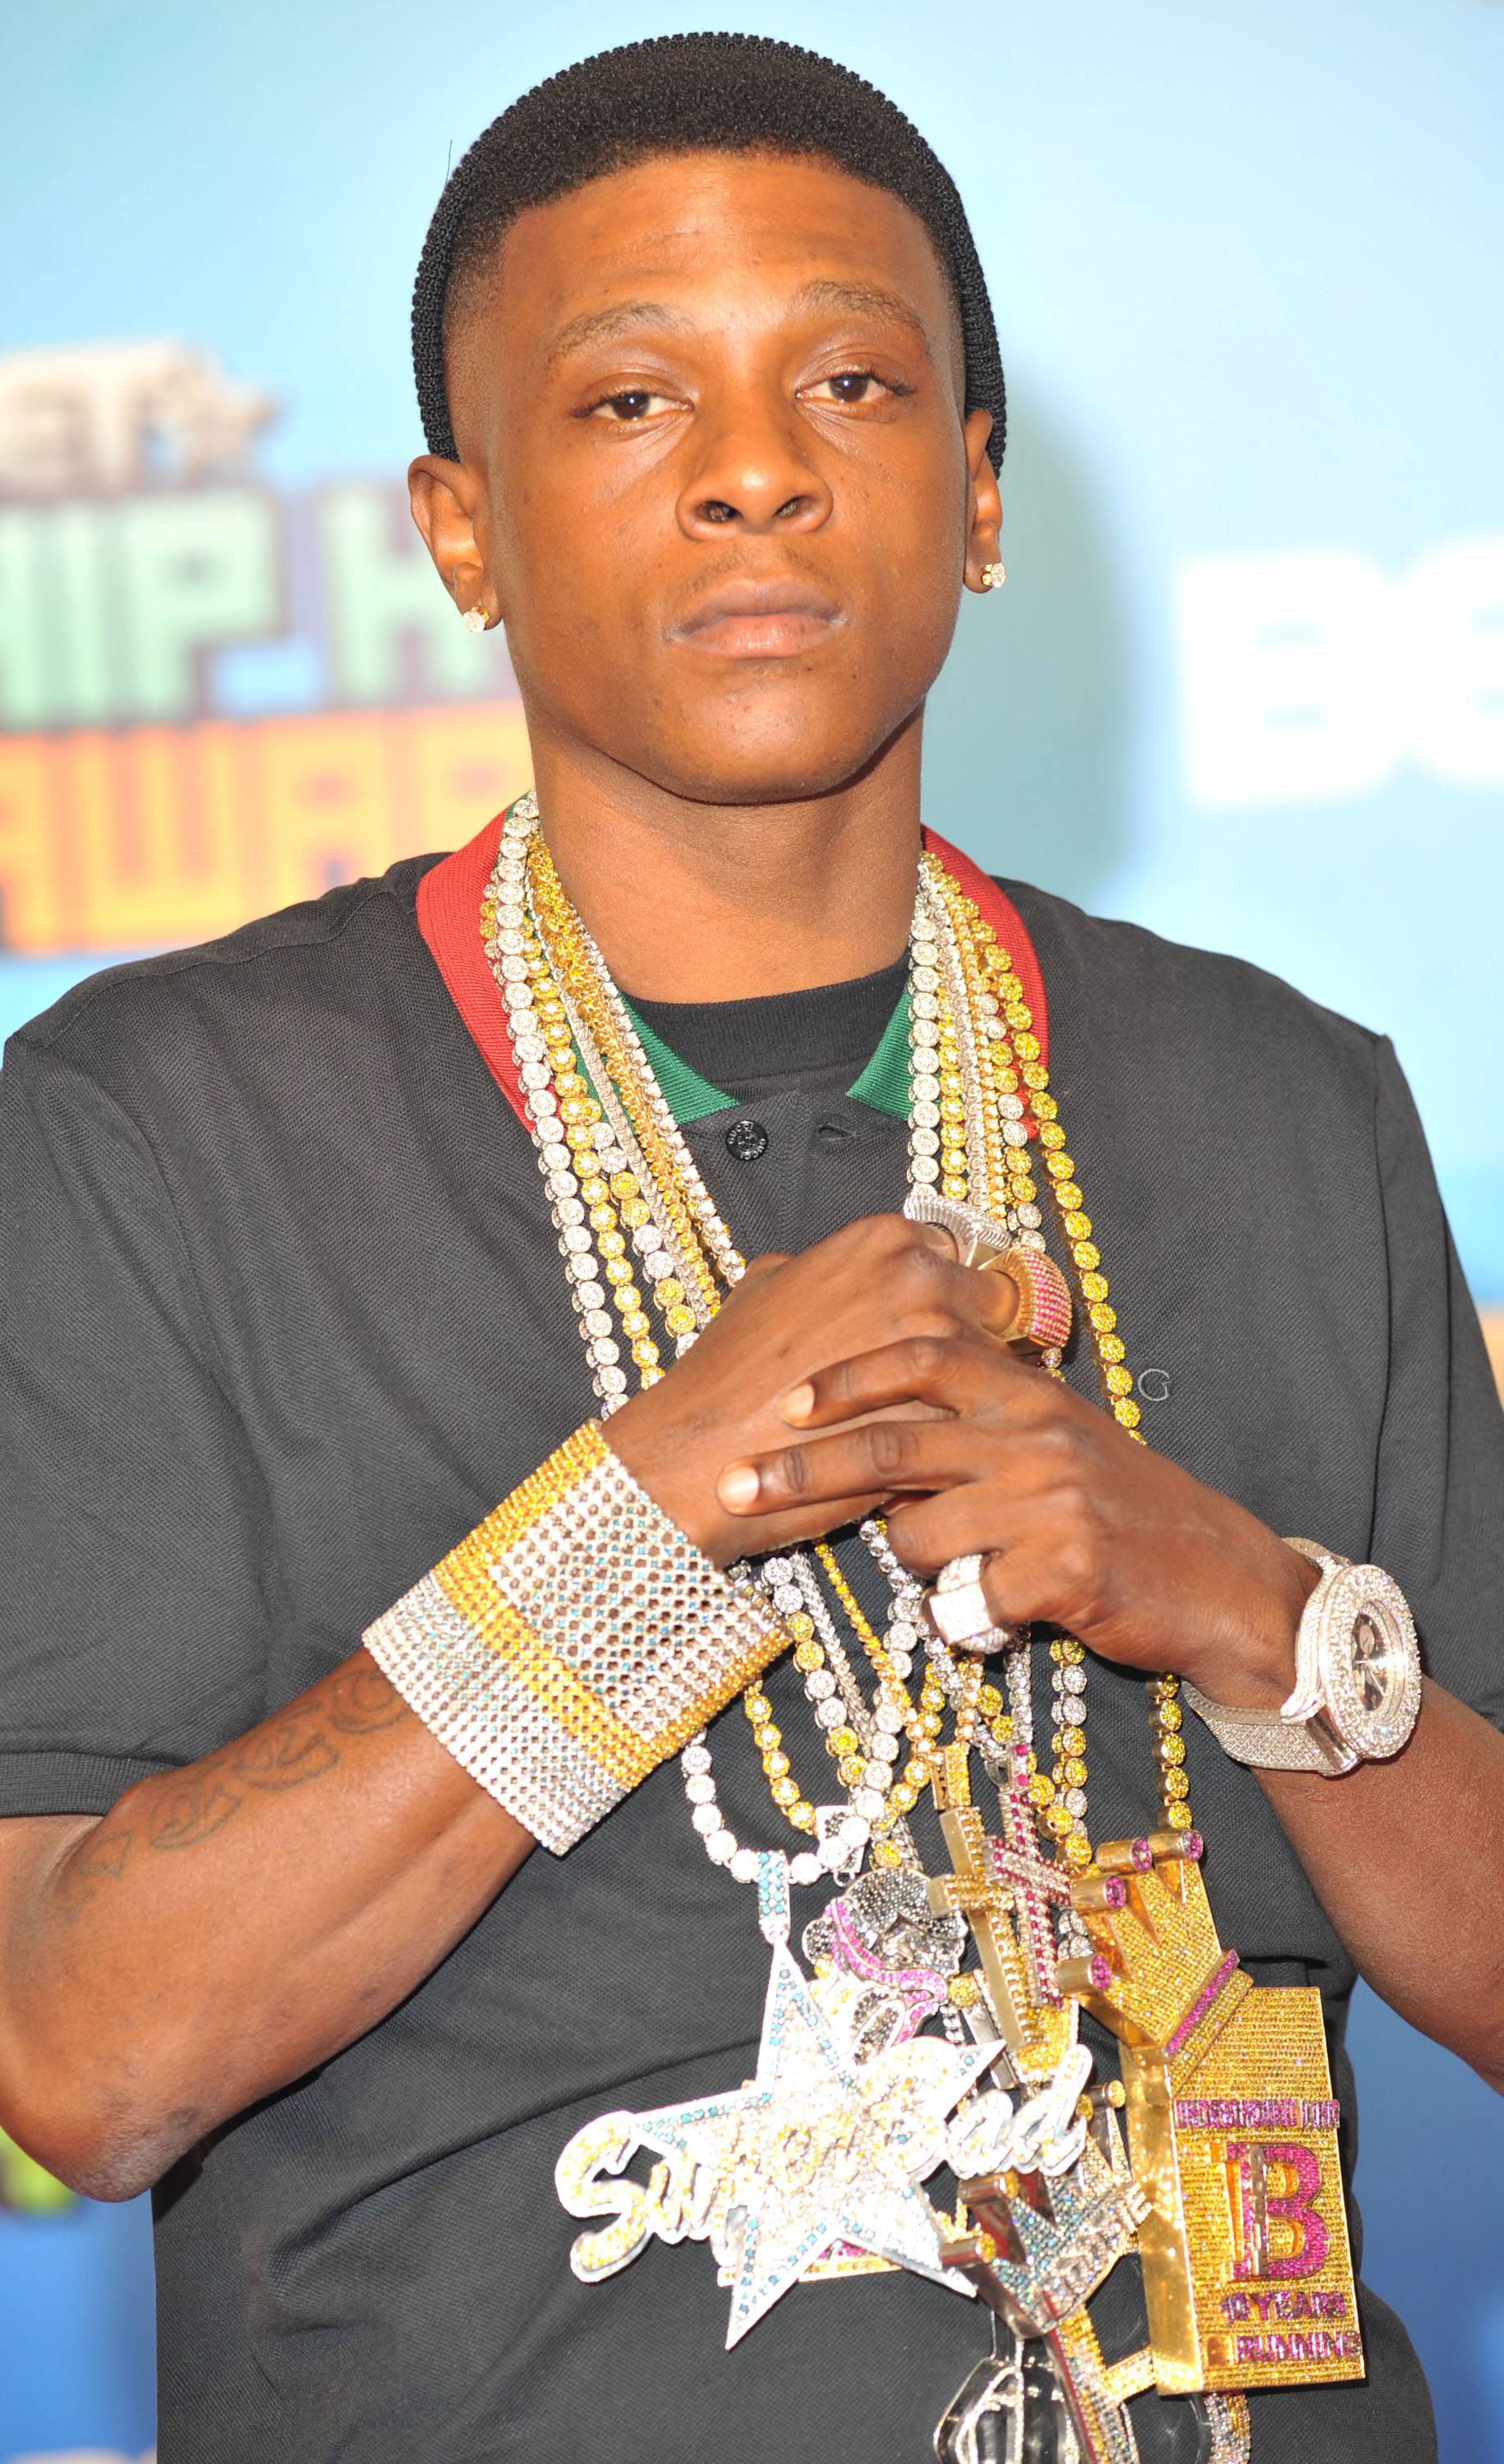 Lil Boosie  - In addition to the serious charge of first degree murder Lil Boosie is now facing, the Baton Rouge rapper is also dodging various drug charges including multiple attempts to smuggle drugs including marijuana, codeine and ecstasy pills into the state prison where he's currently incarcerated.&nbsp; &nbsp;(Photo by Moses Robinson/PictureGroup)